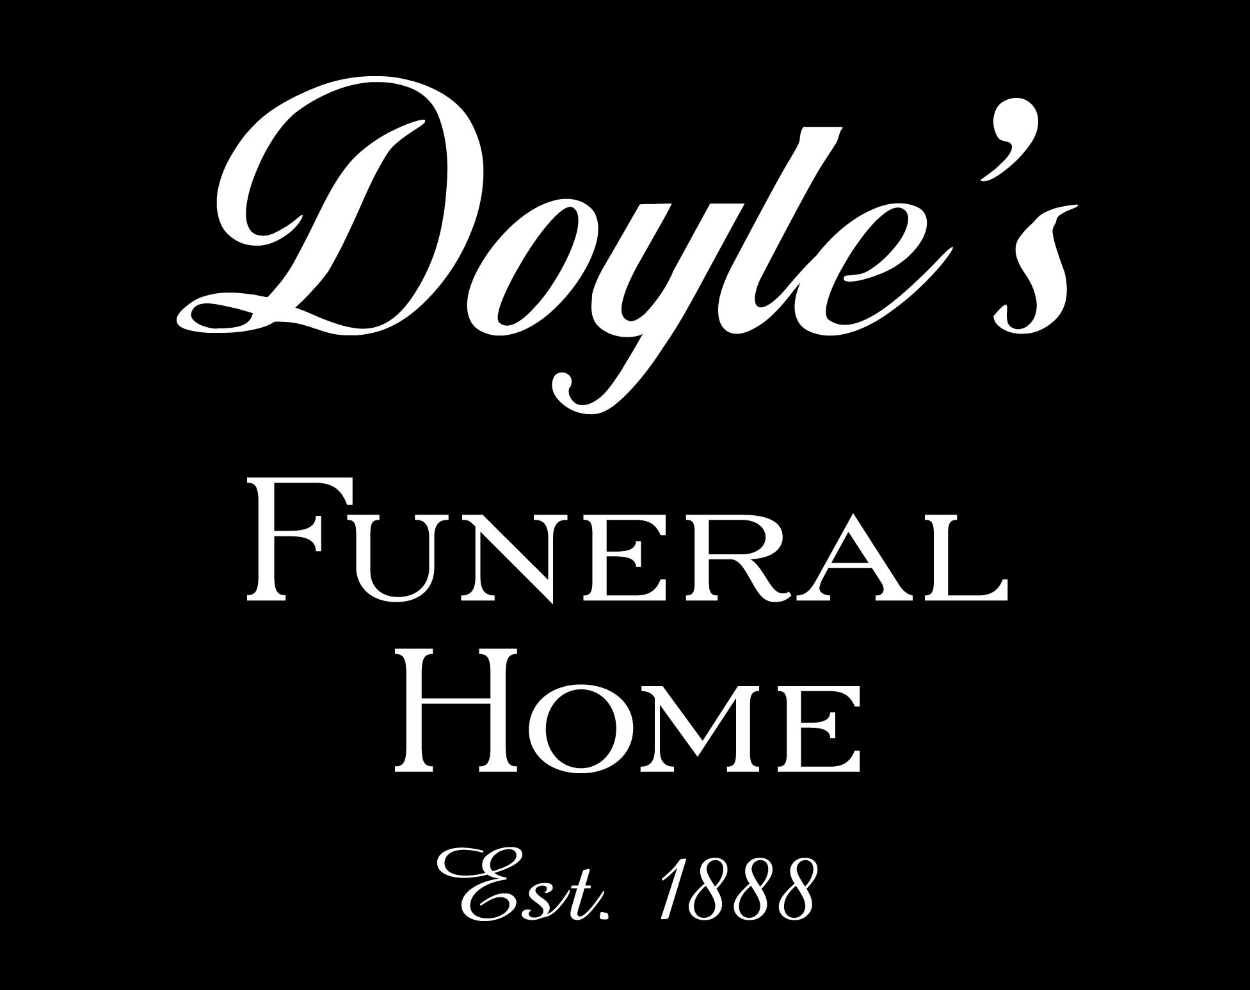 Doyle's Funeral Home